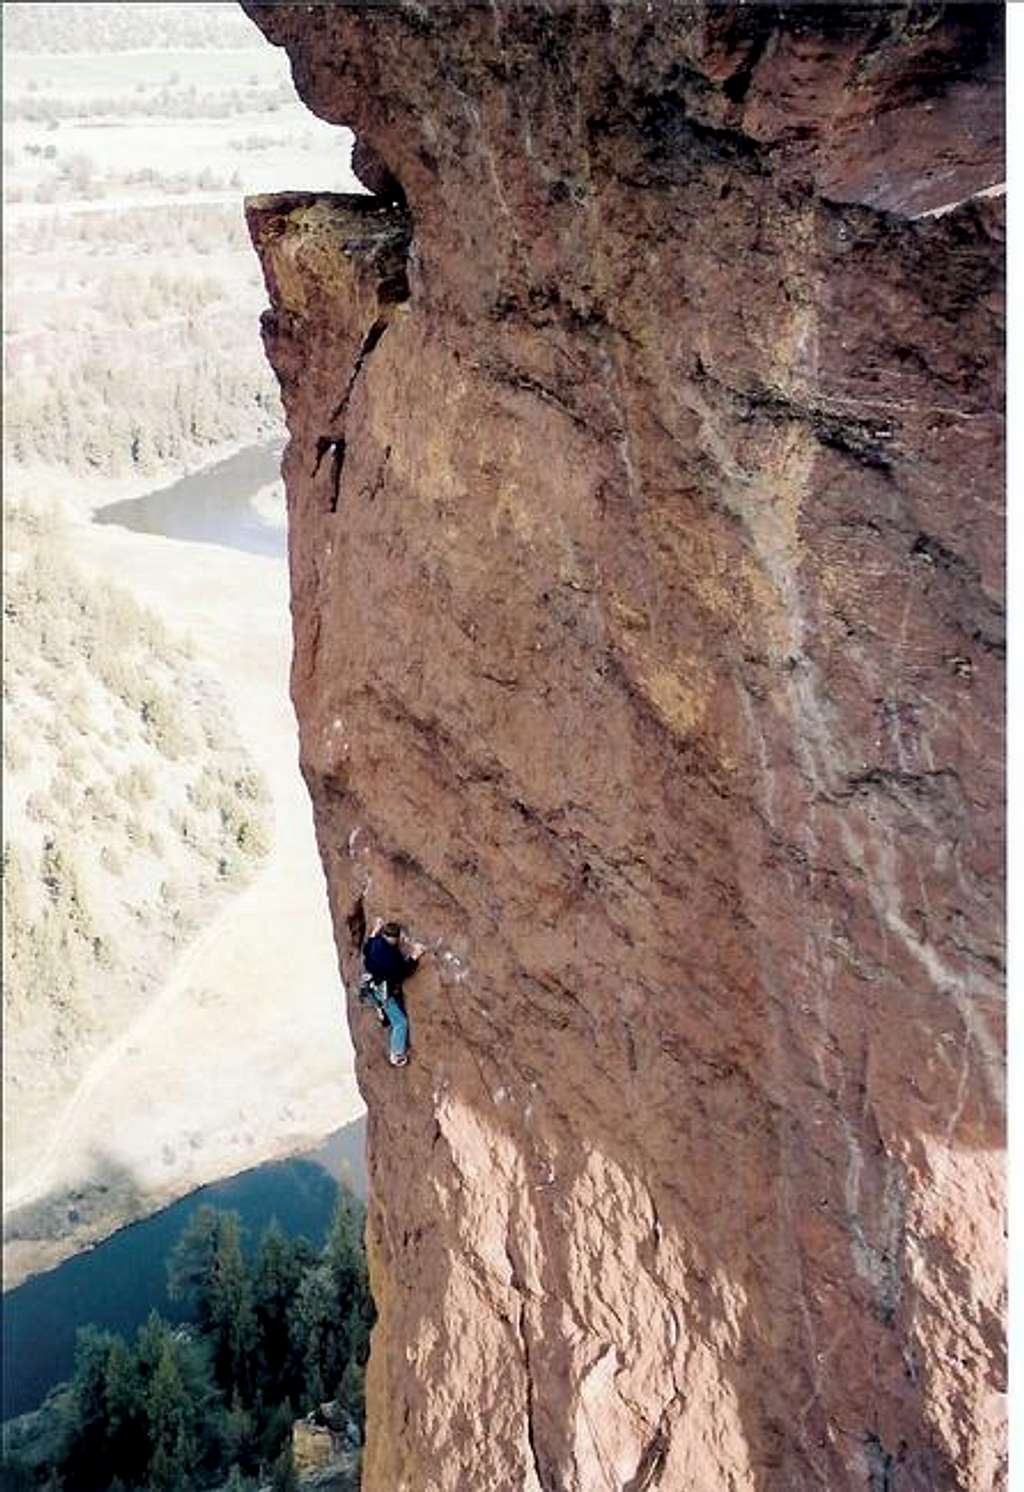 Me leading the second pitch....